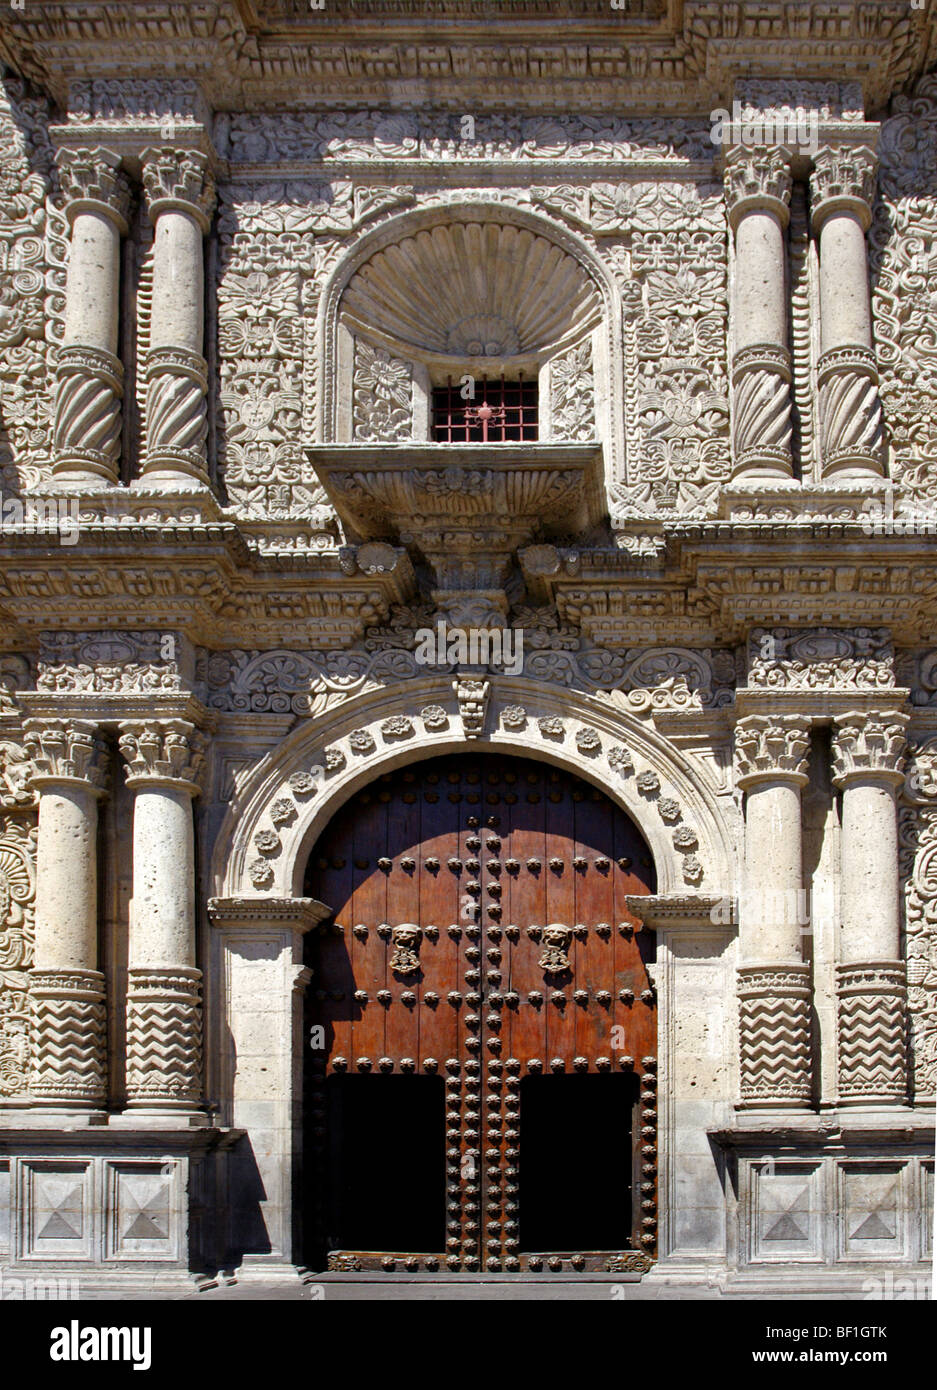 Details on the front of La Compania, Arequipa, Peru Stock Photo